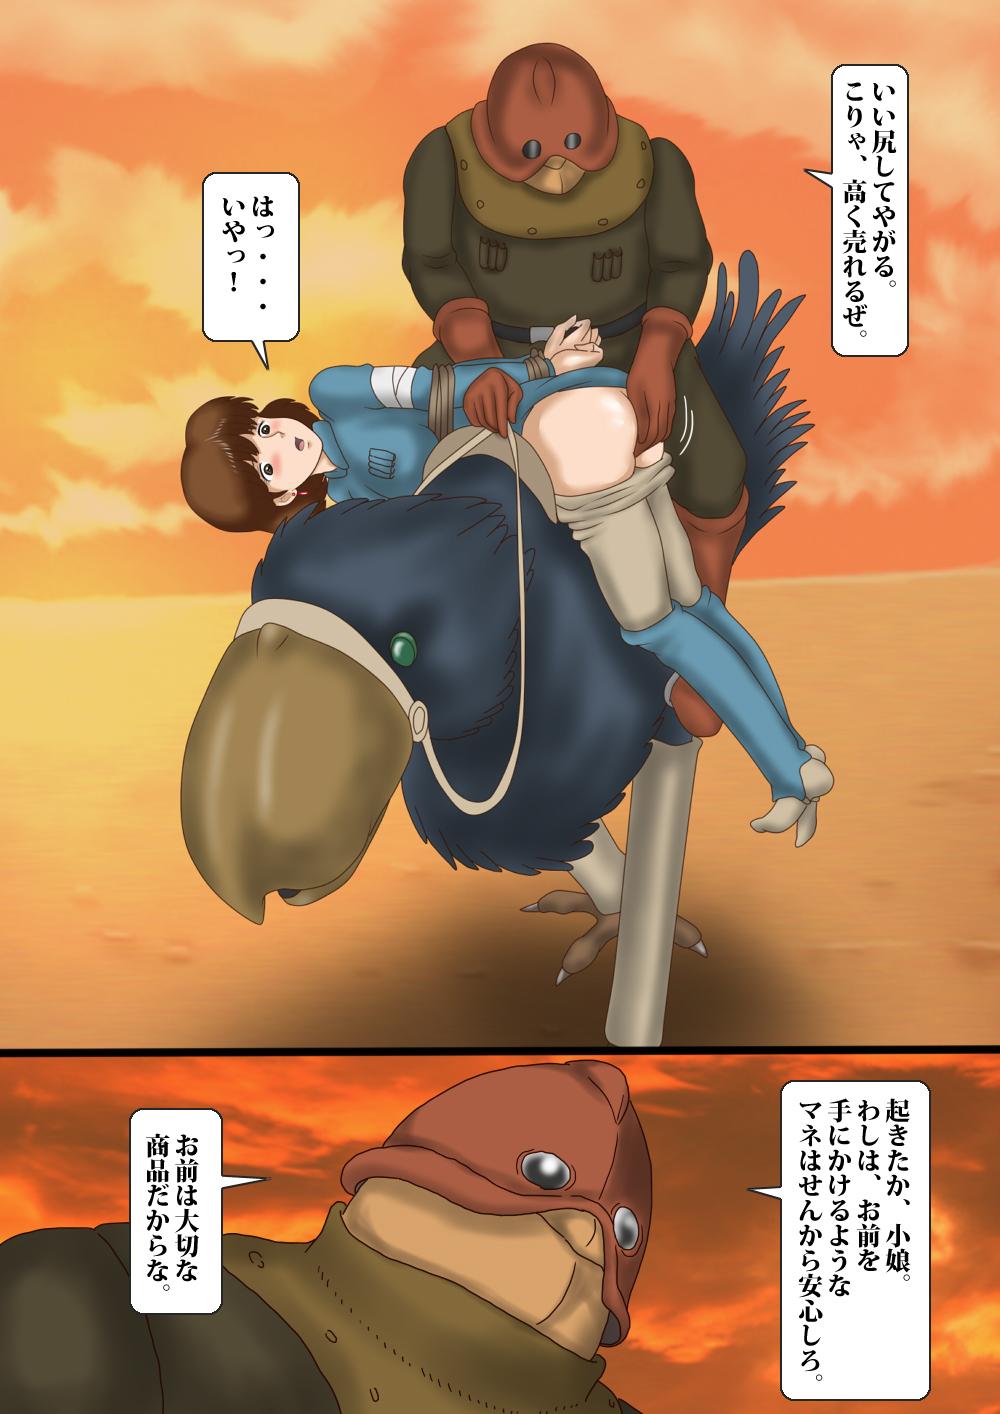 Nudes Kaze no Tani no Goumon Aido - Nausicaa of the valley of the wind Clothed - Picture 3